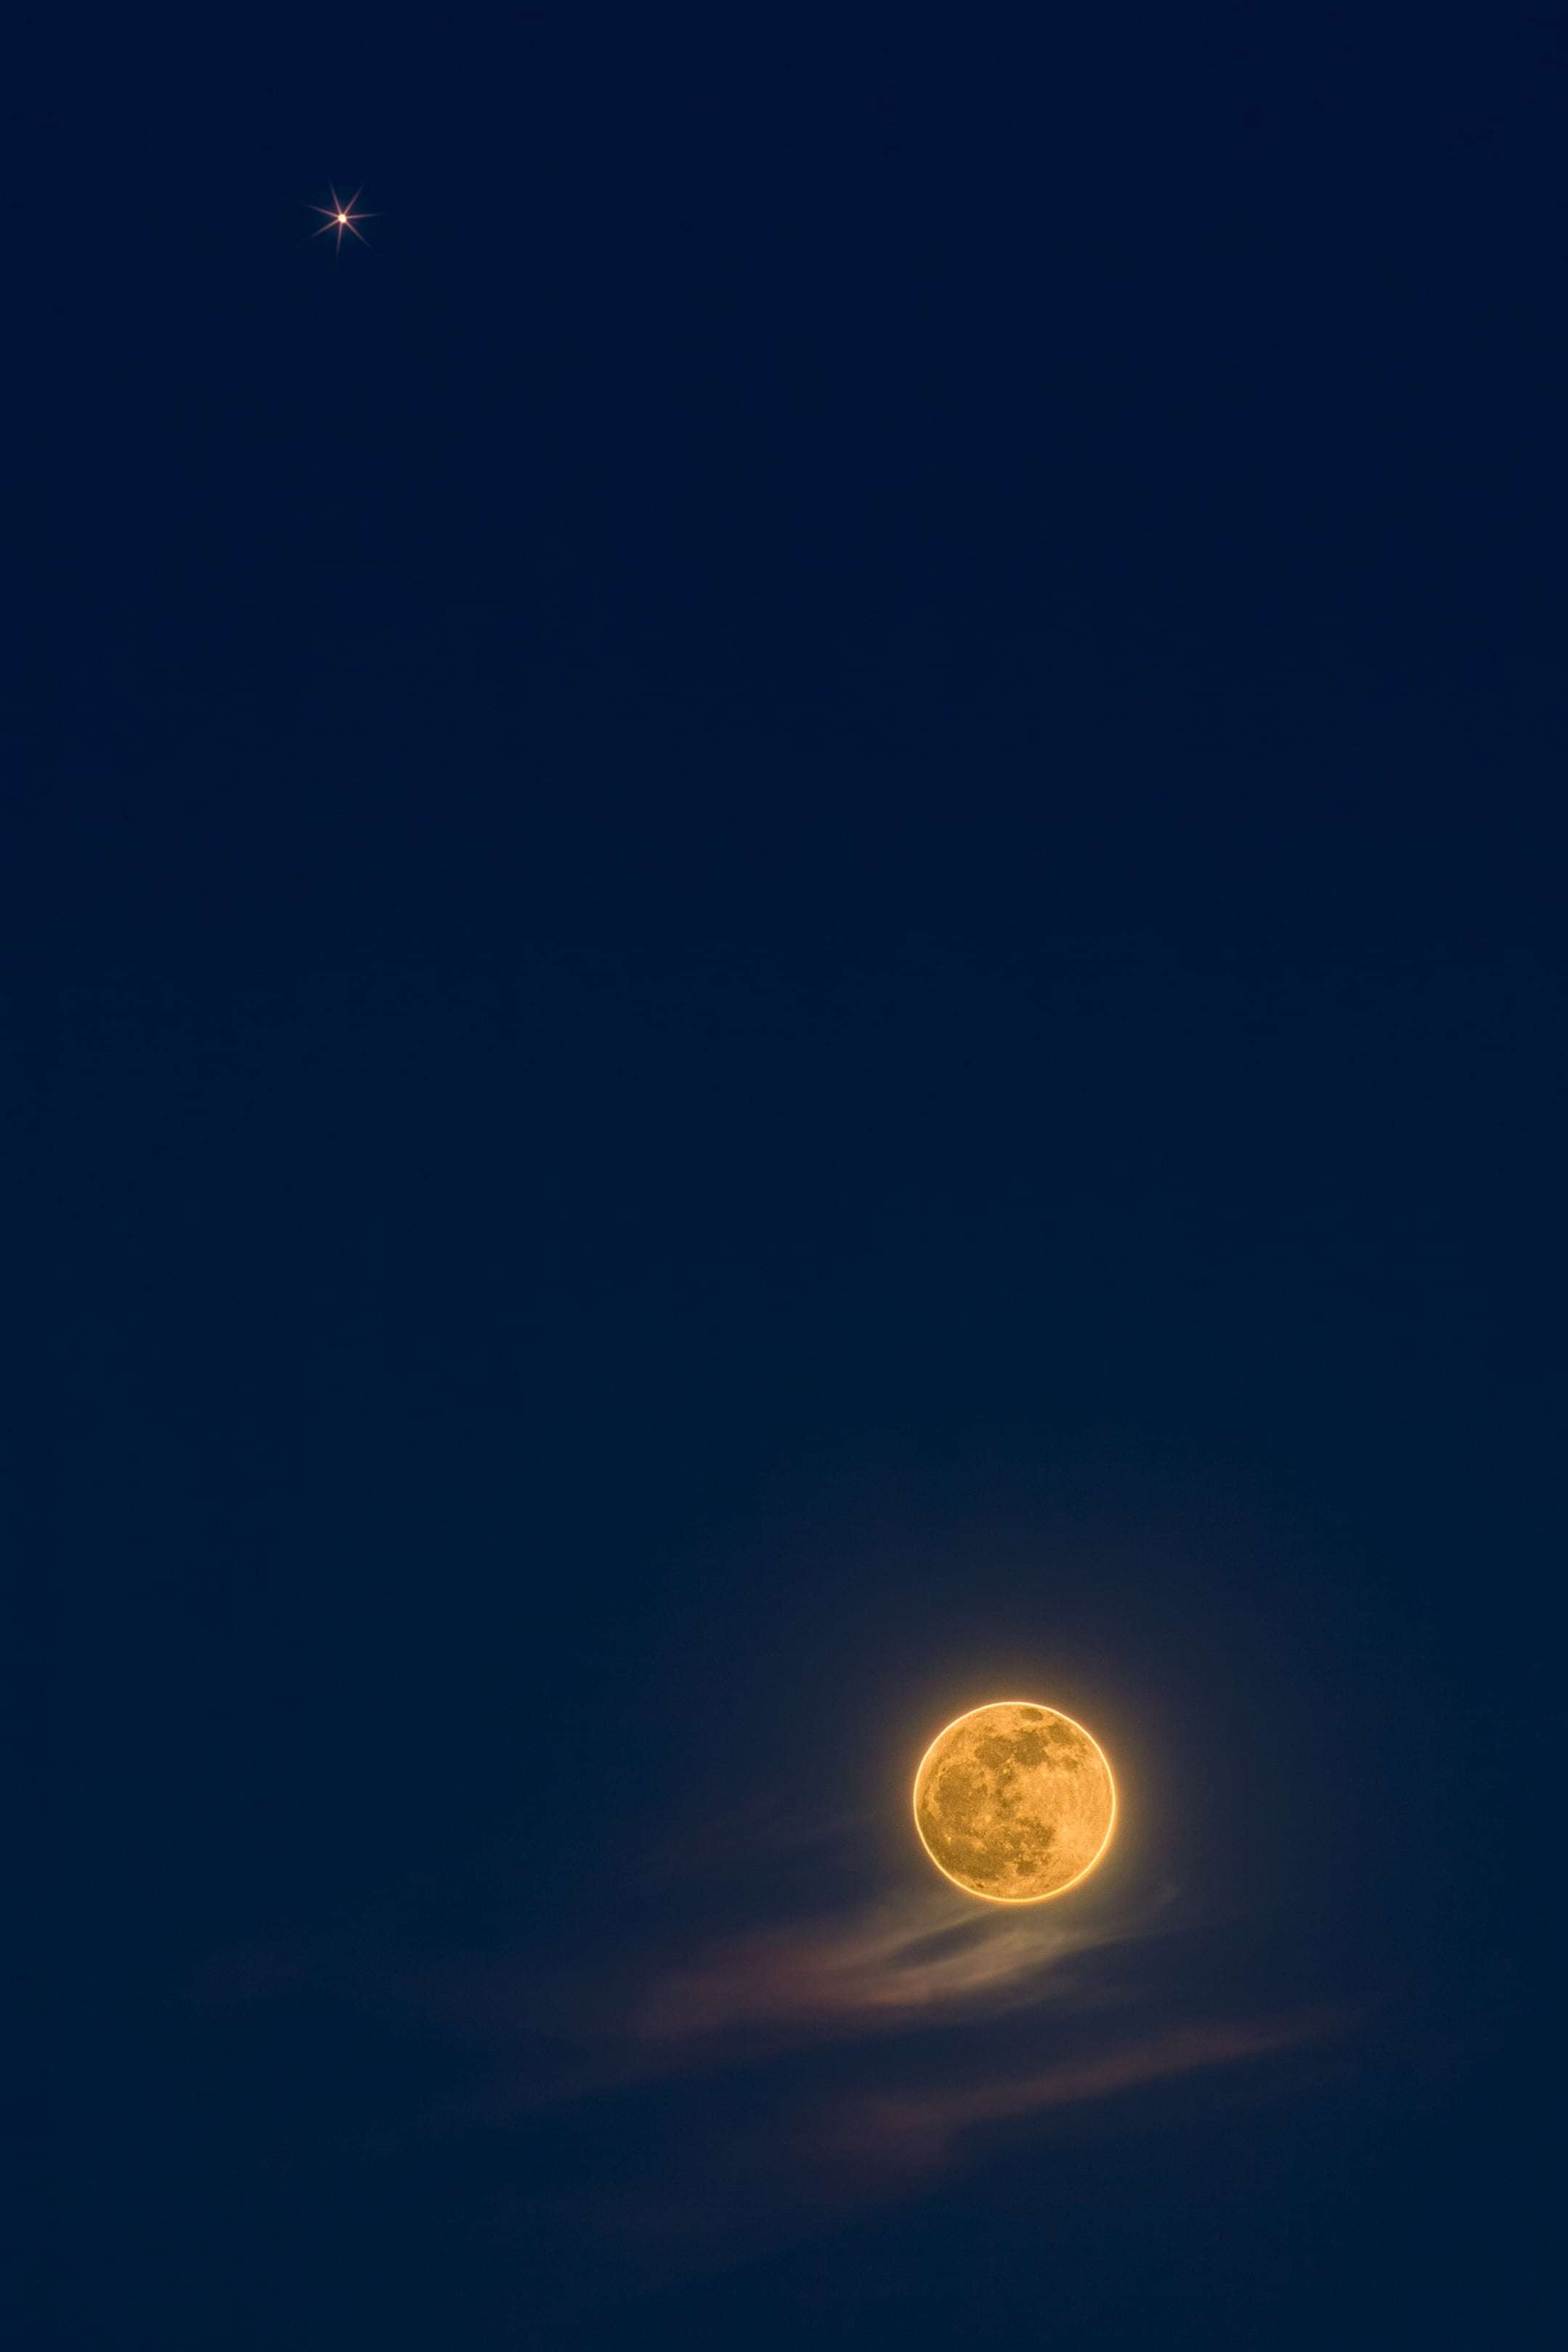 beige fullmoon, night, sky, astronomy, space, moonlight, nature